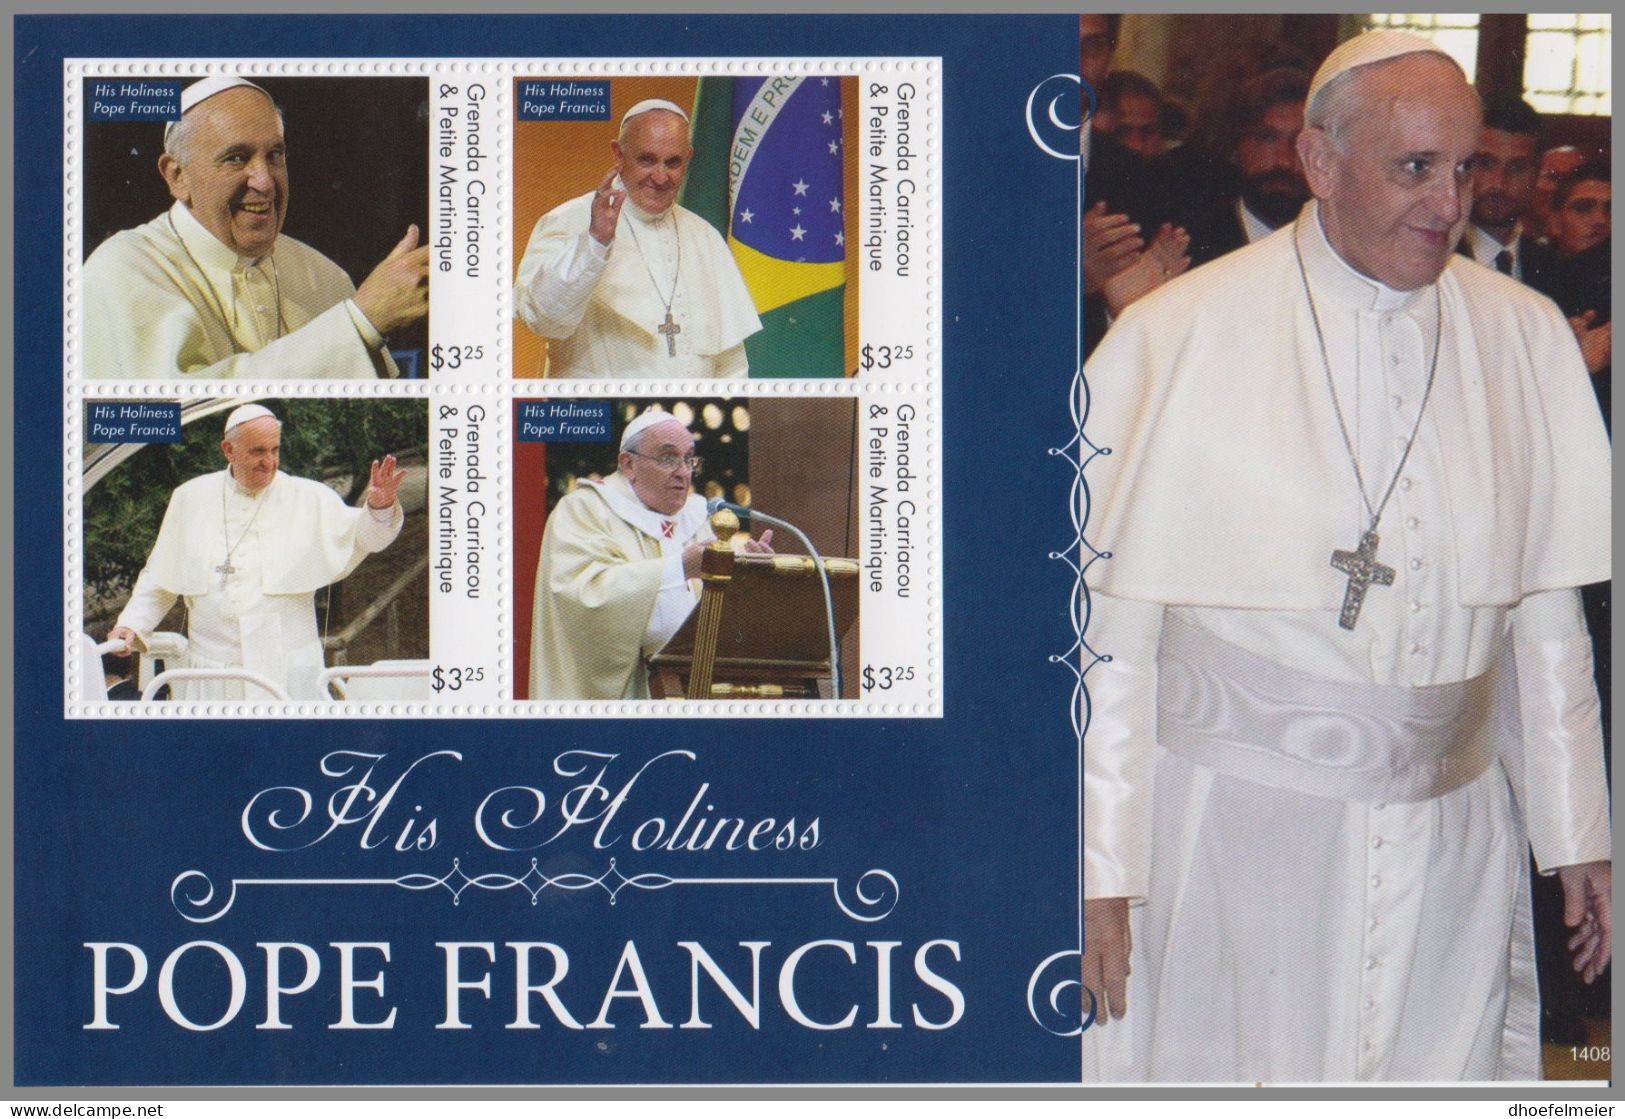 GRENADA CARRIACOU 2014 MNH Pope Francis His Holiness 1408 M/S – OFFICIAL ISSUE – DHQ49610 - Pausen